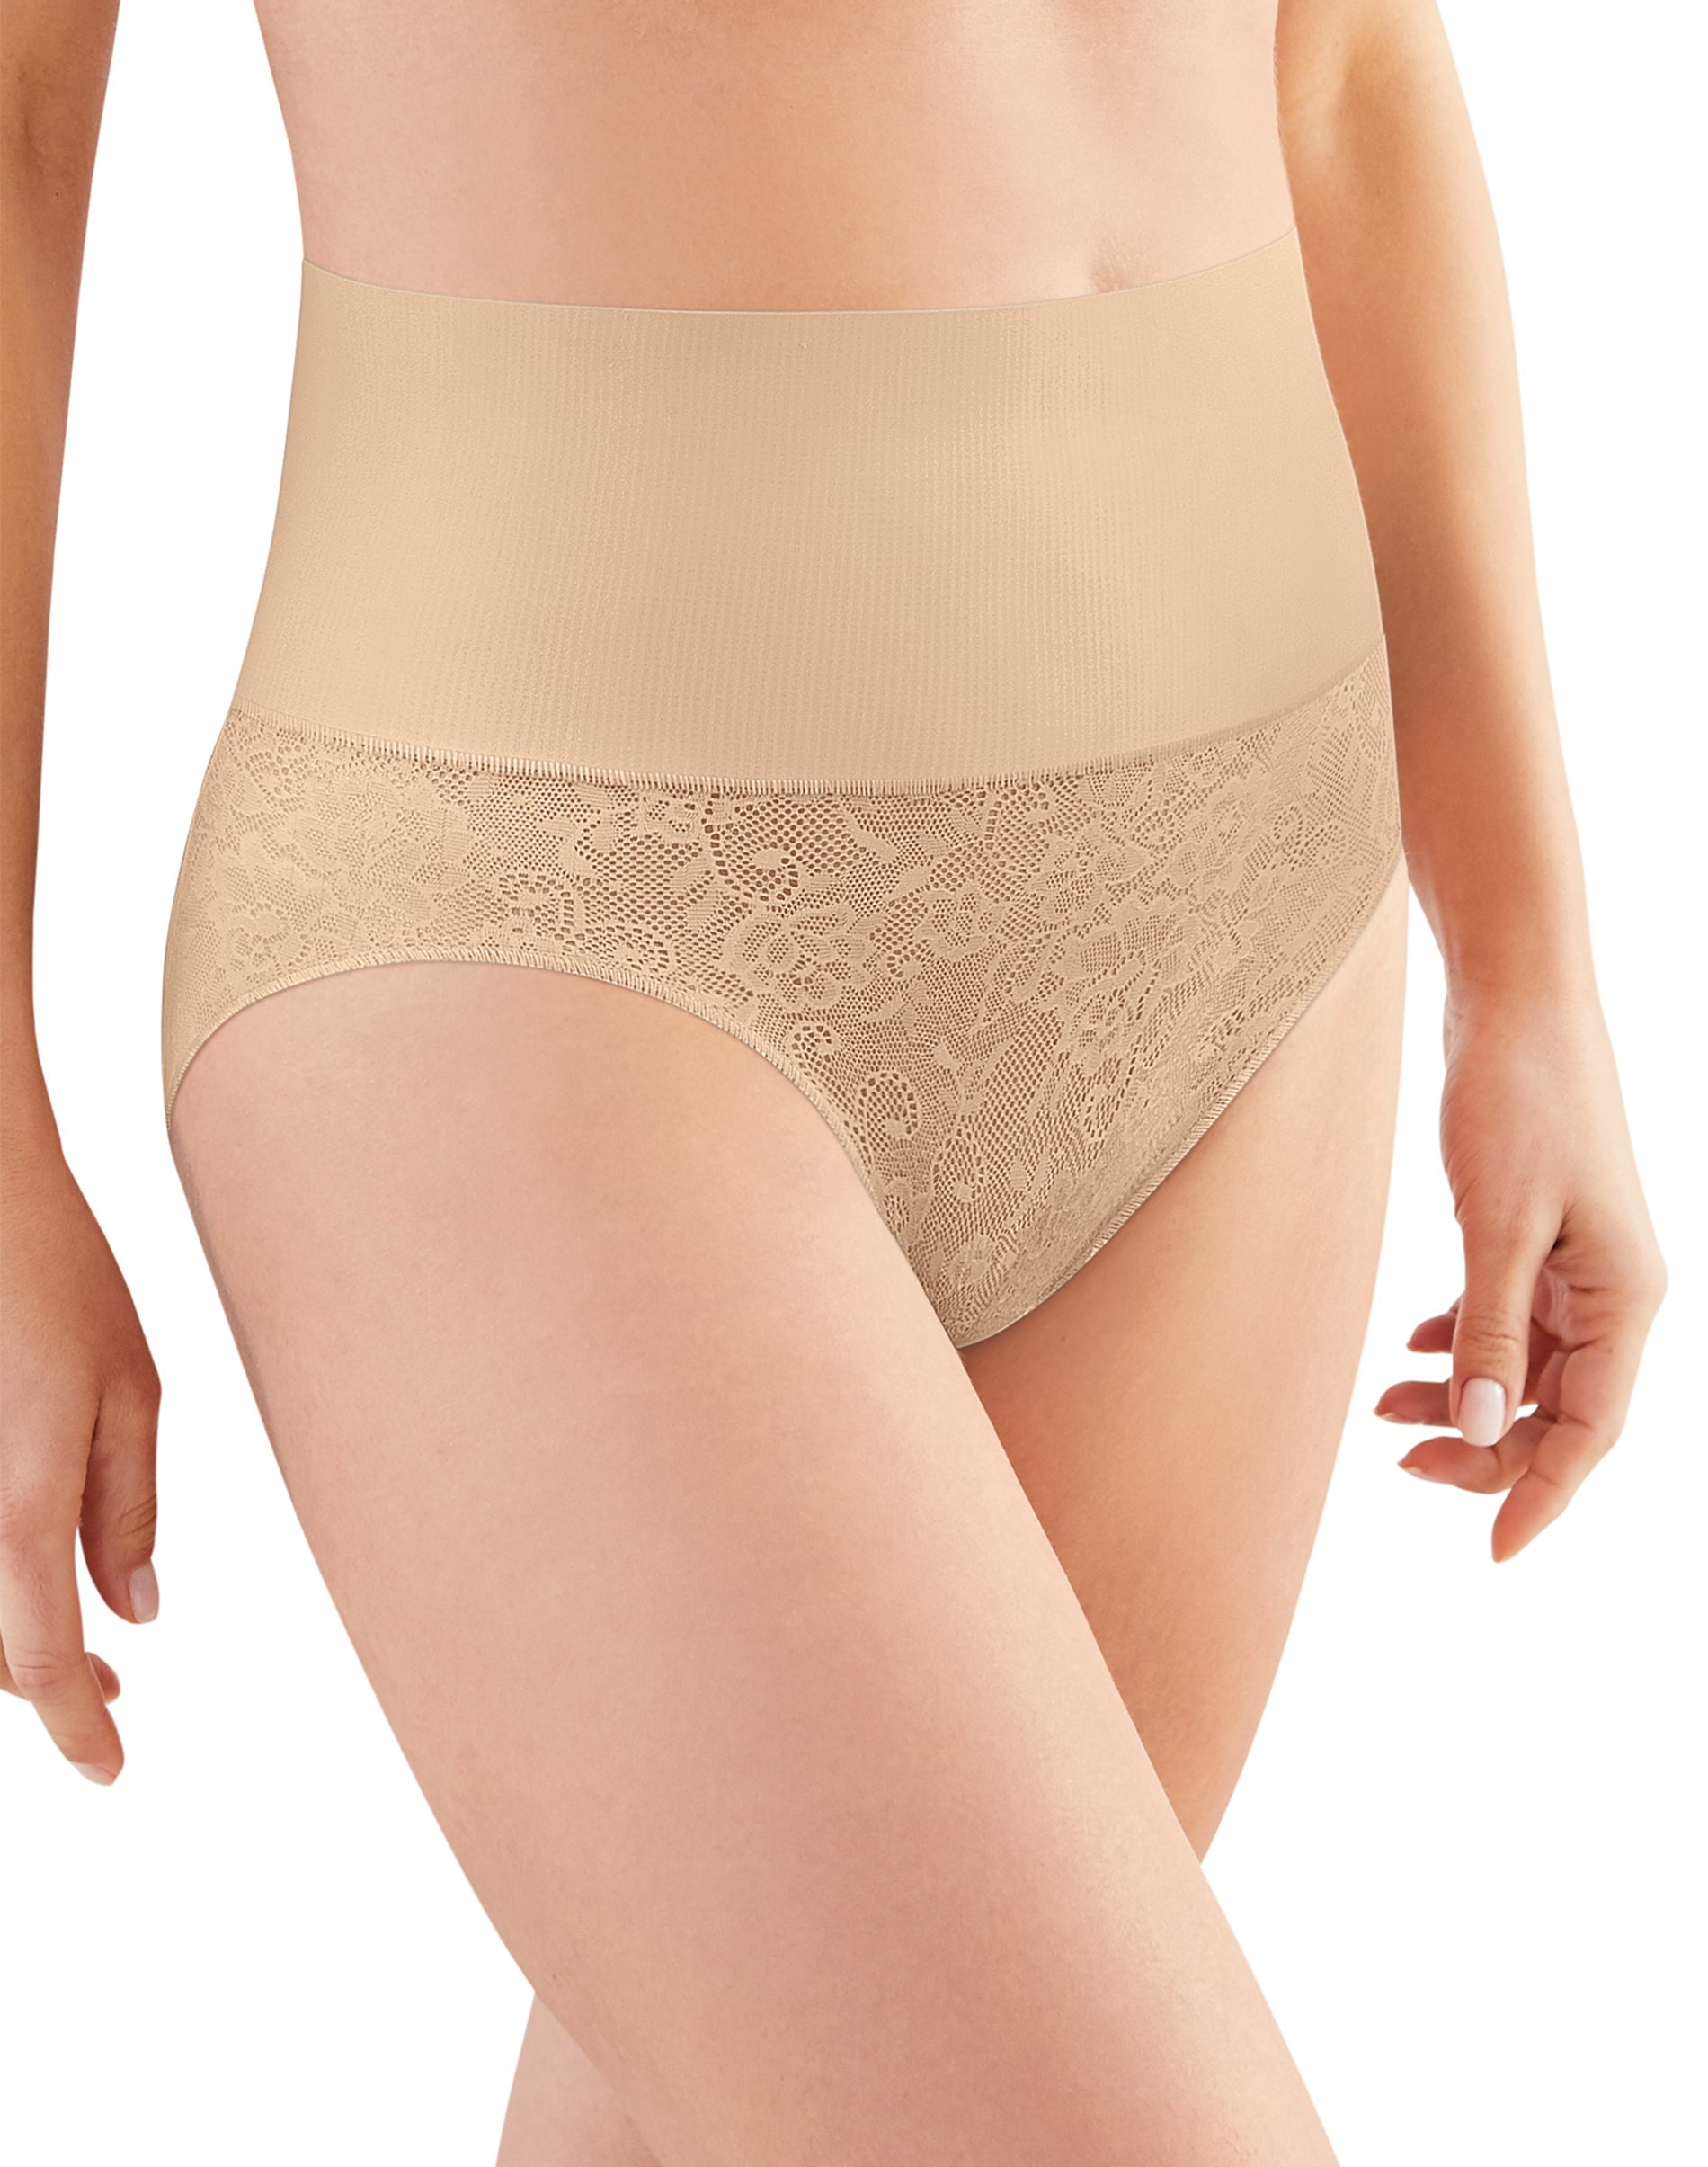 Maidenform Firm-Control Shaping Brief Nude 1/Transparent Lace XL Women's